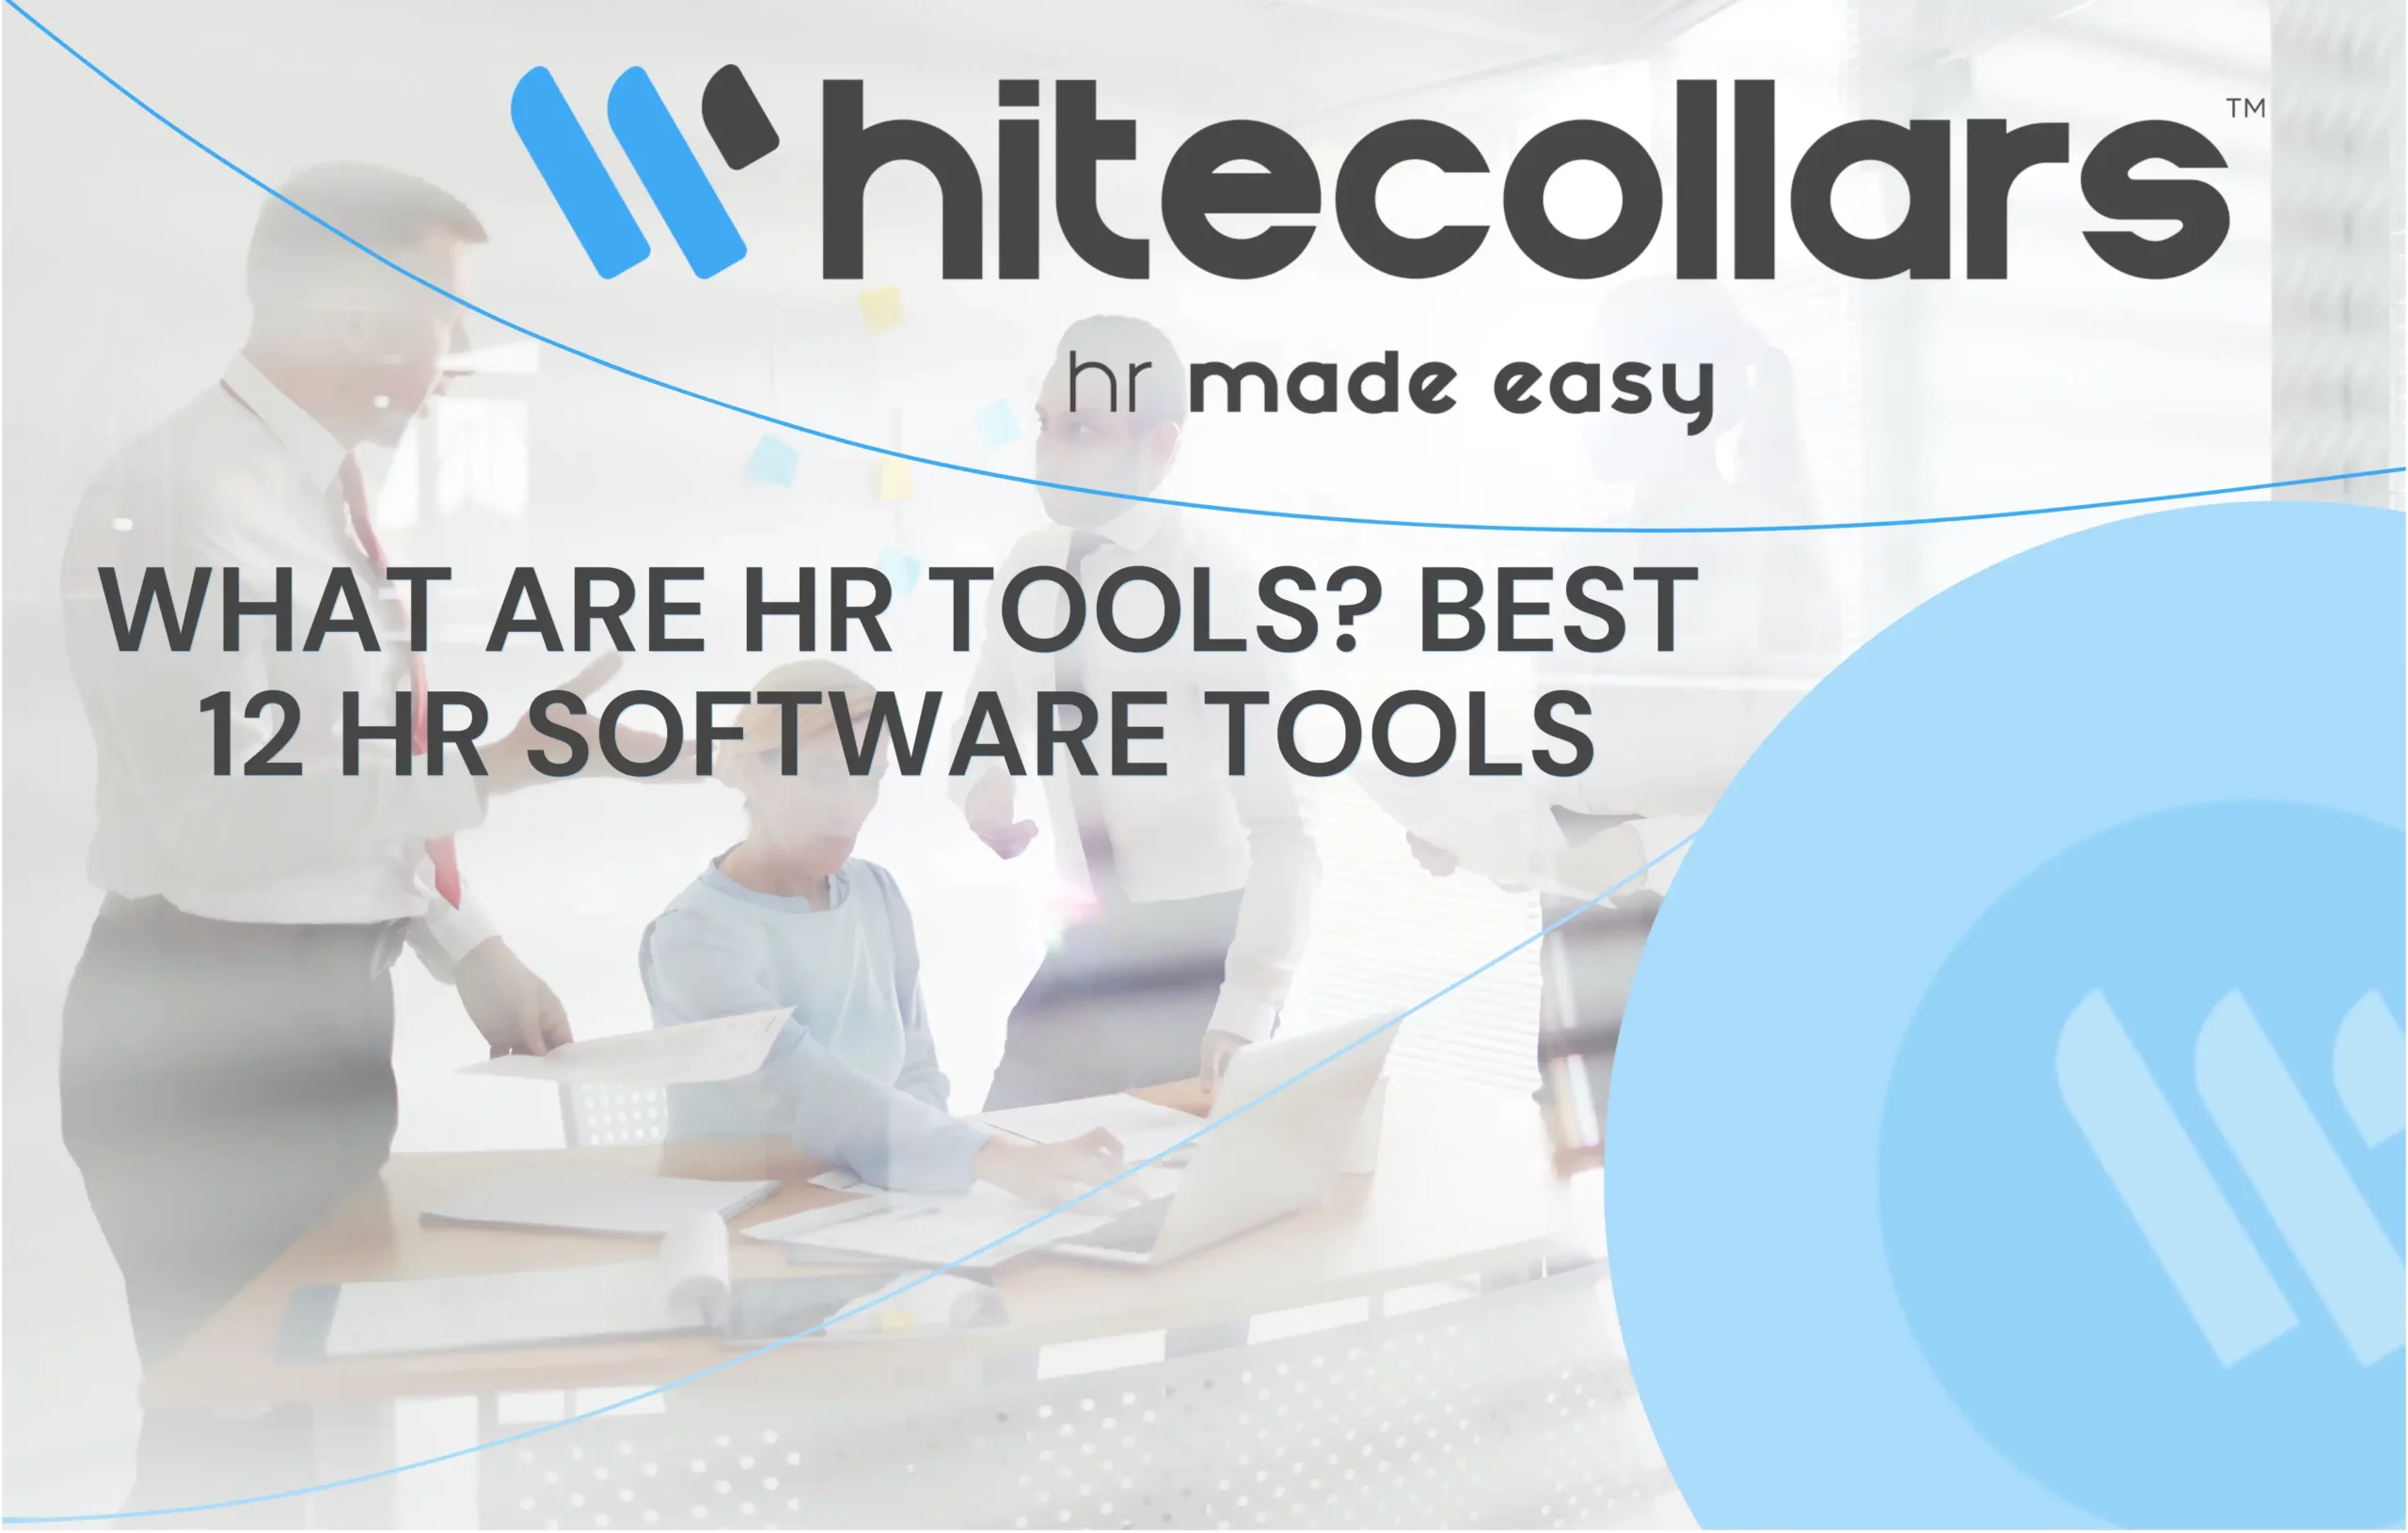 whitecollars What are HR tools? Best 12 HR Software Tools